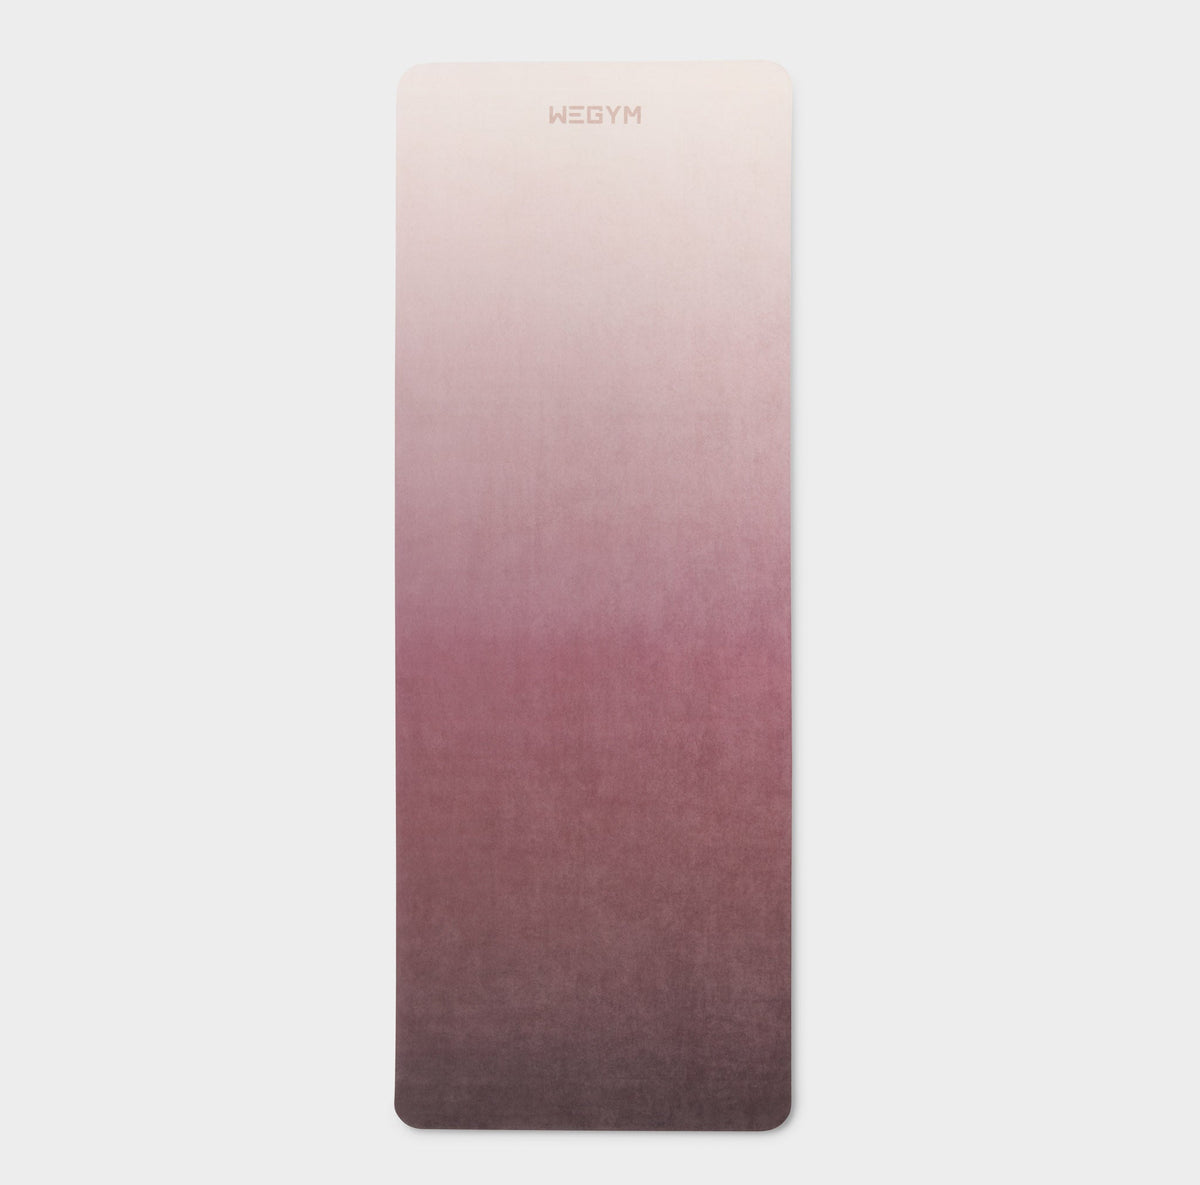 4mm Yoga Mat - Suede - Blush Ombre